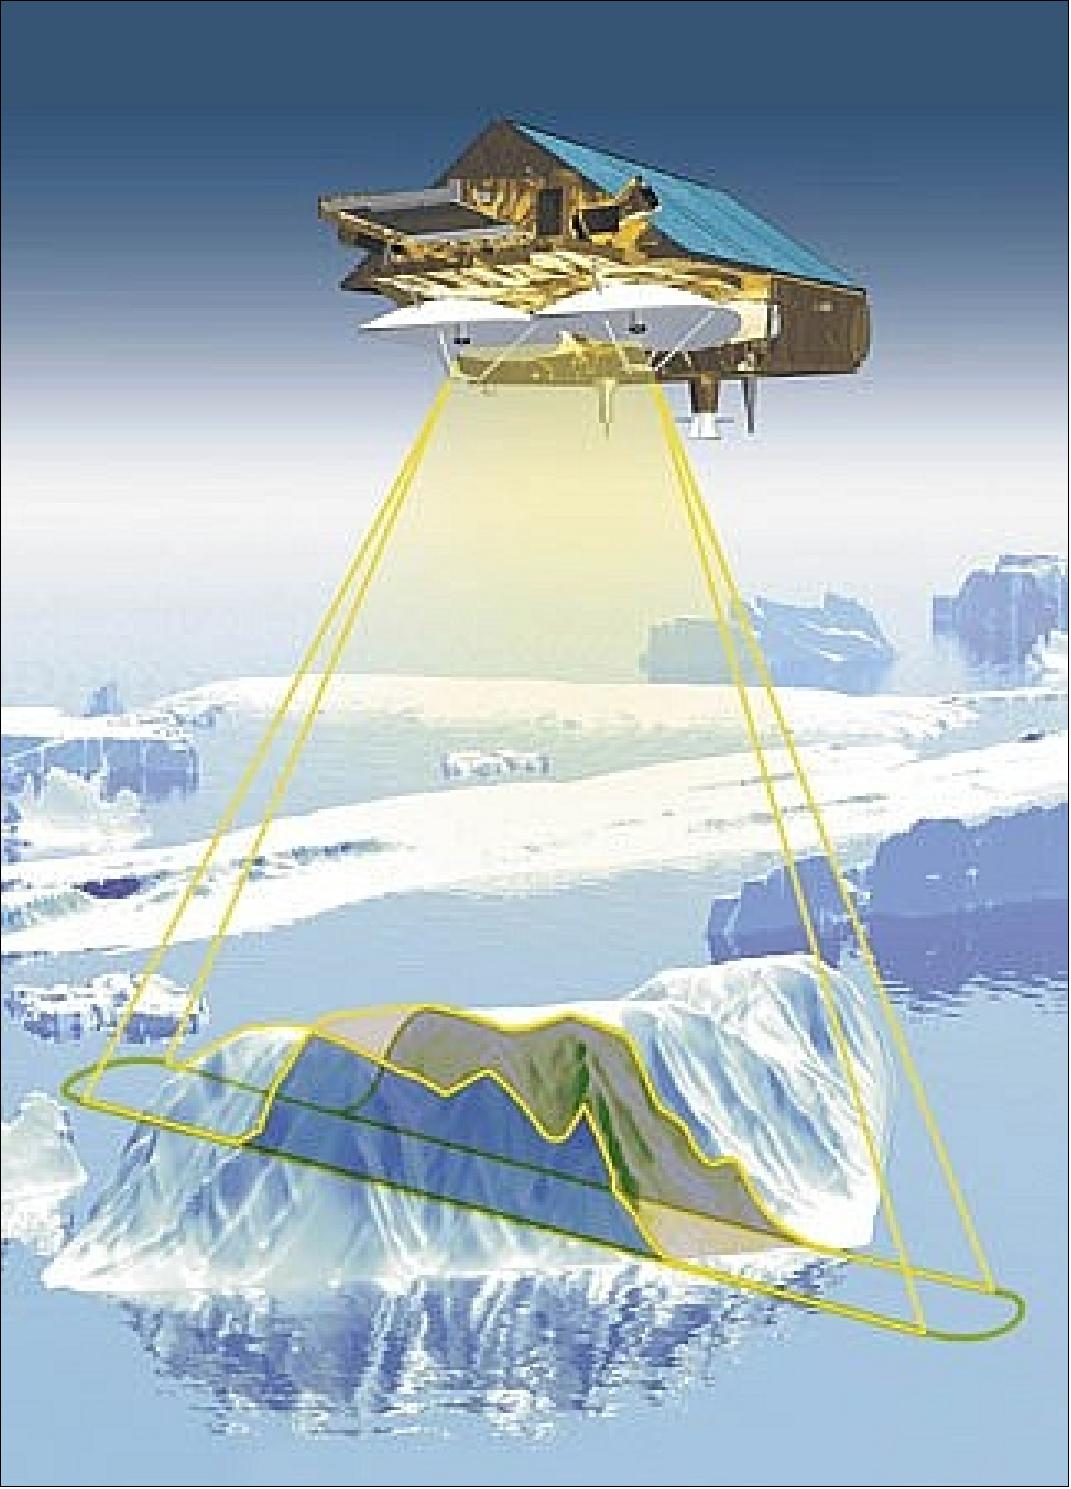 Figure 101: Artist's view of the CryoSat-2 observation concept (image credit: EADS Astrium)